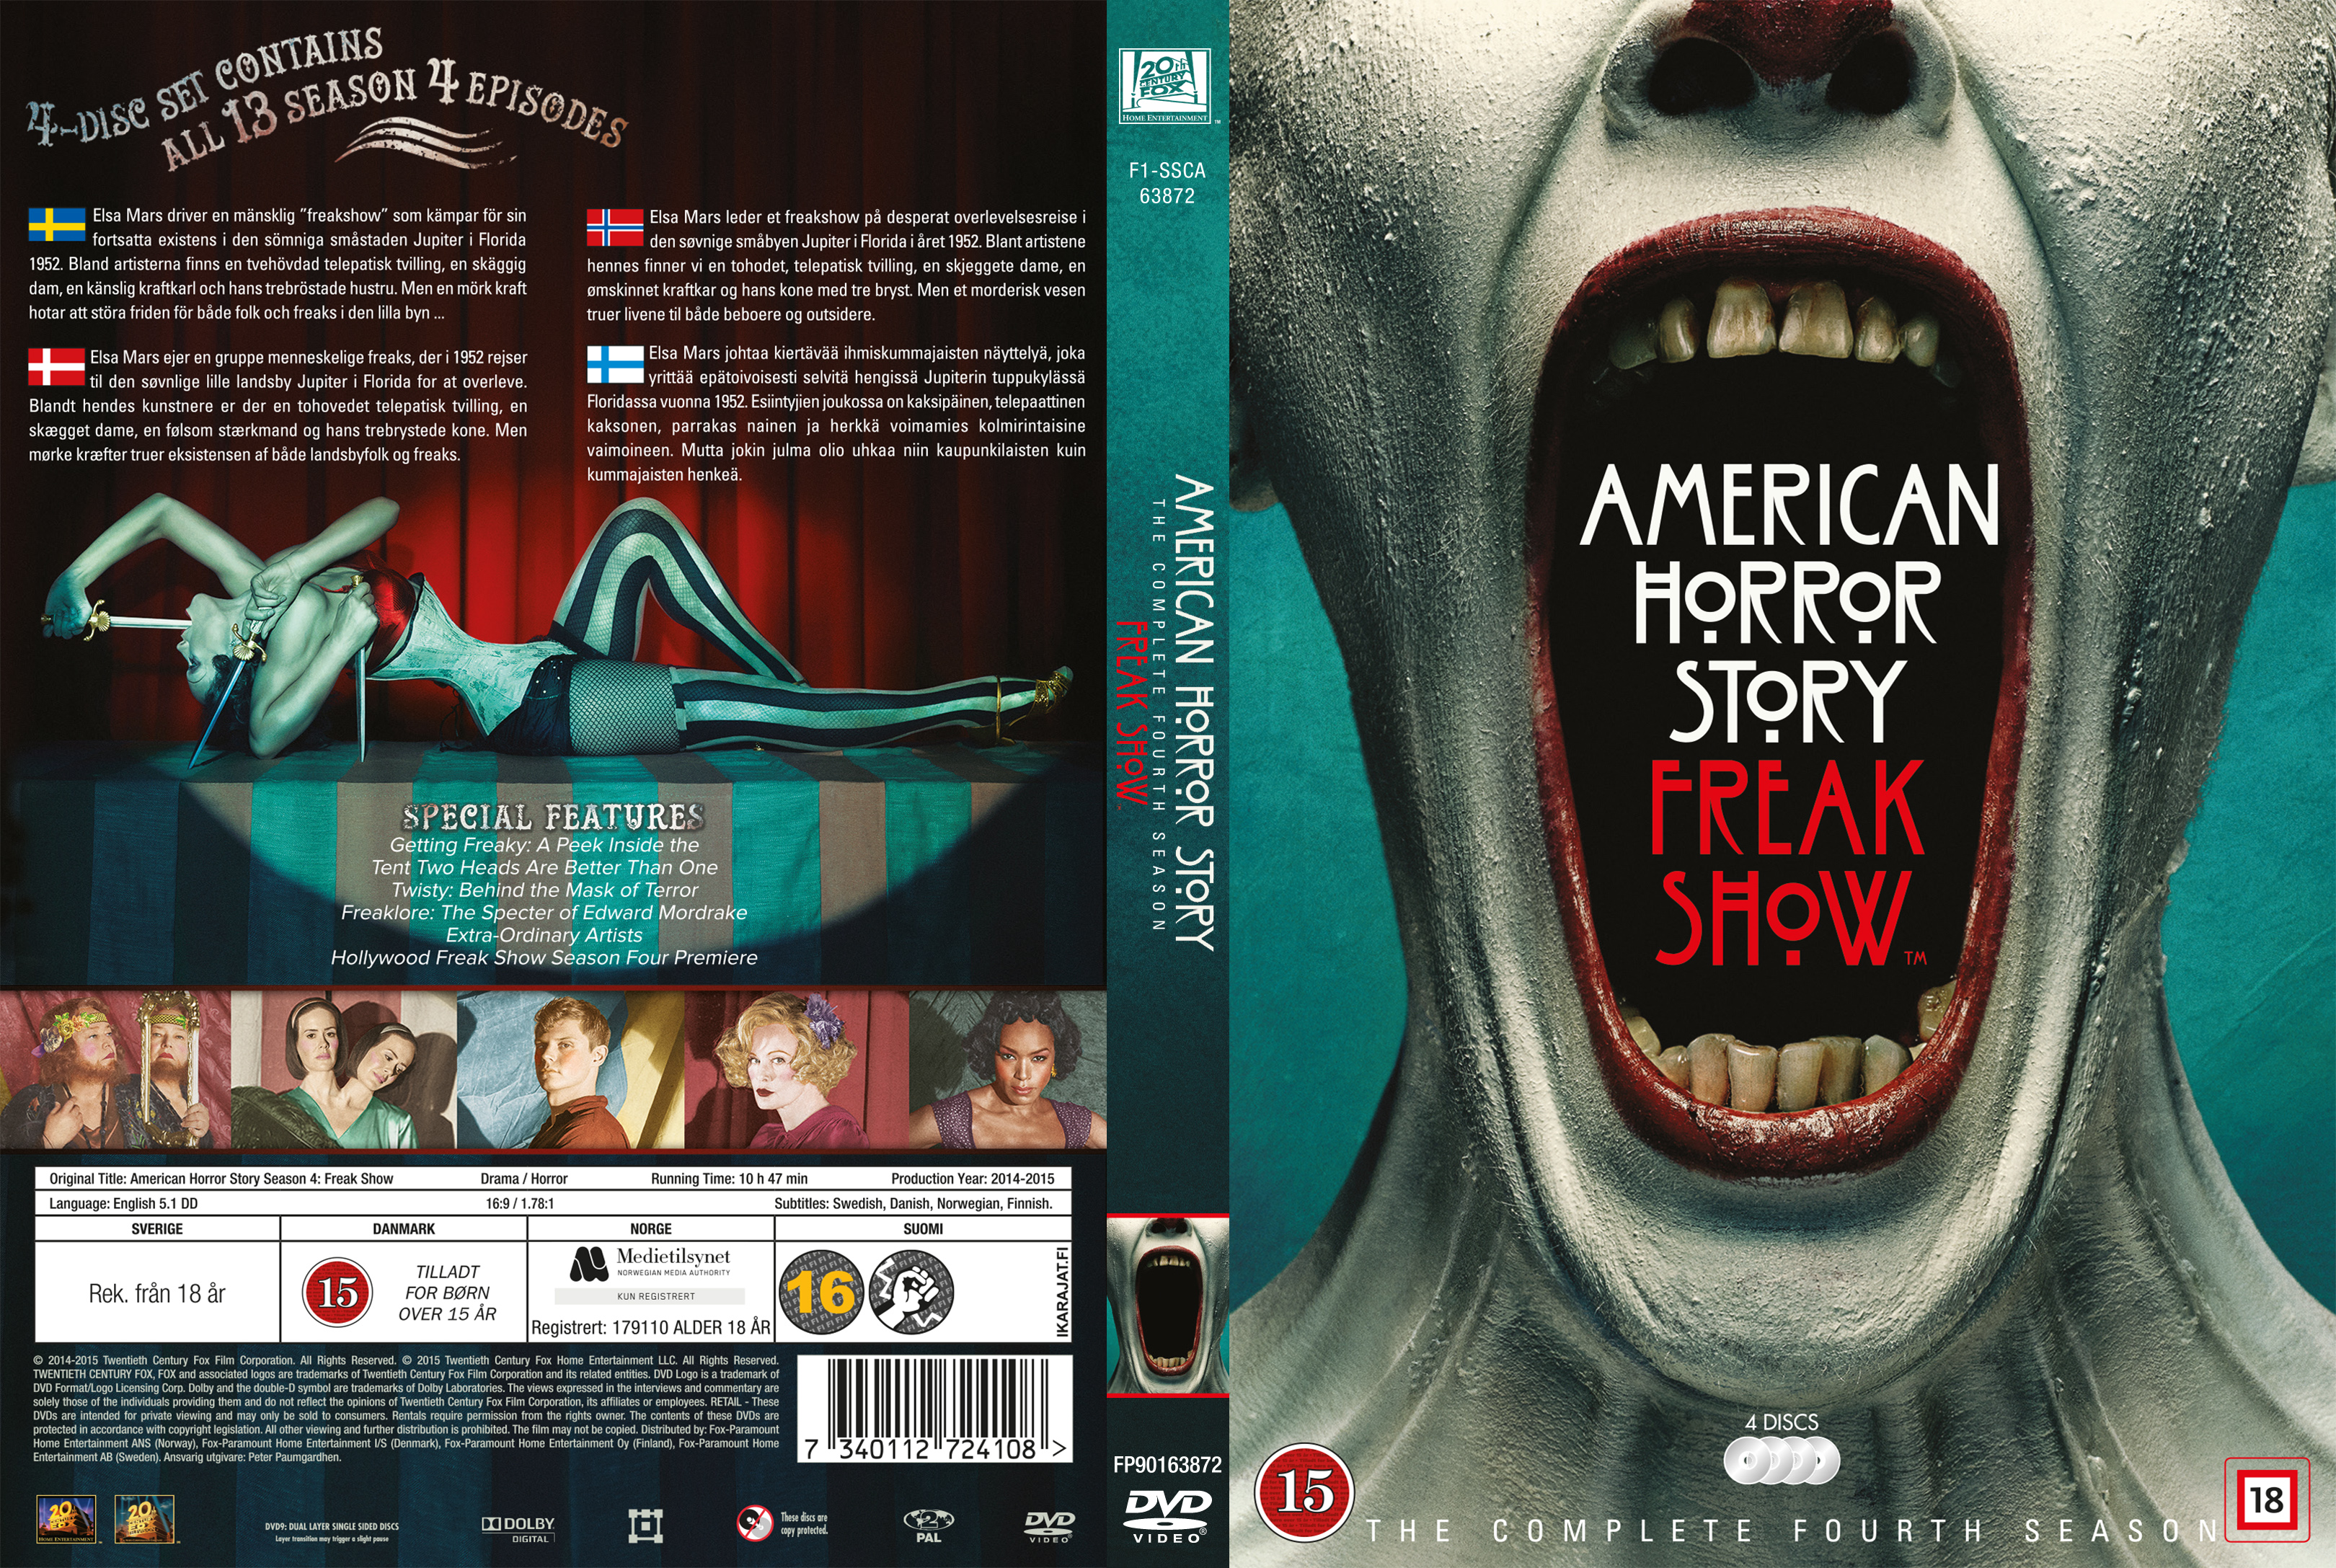 American horror story freakshow: extra-ordinary-artists